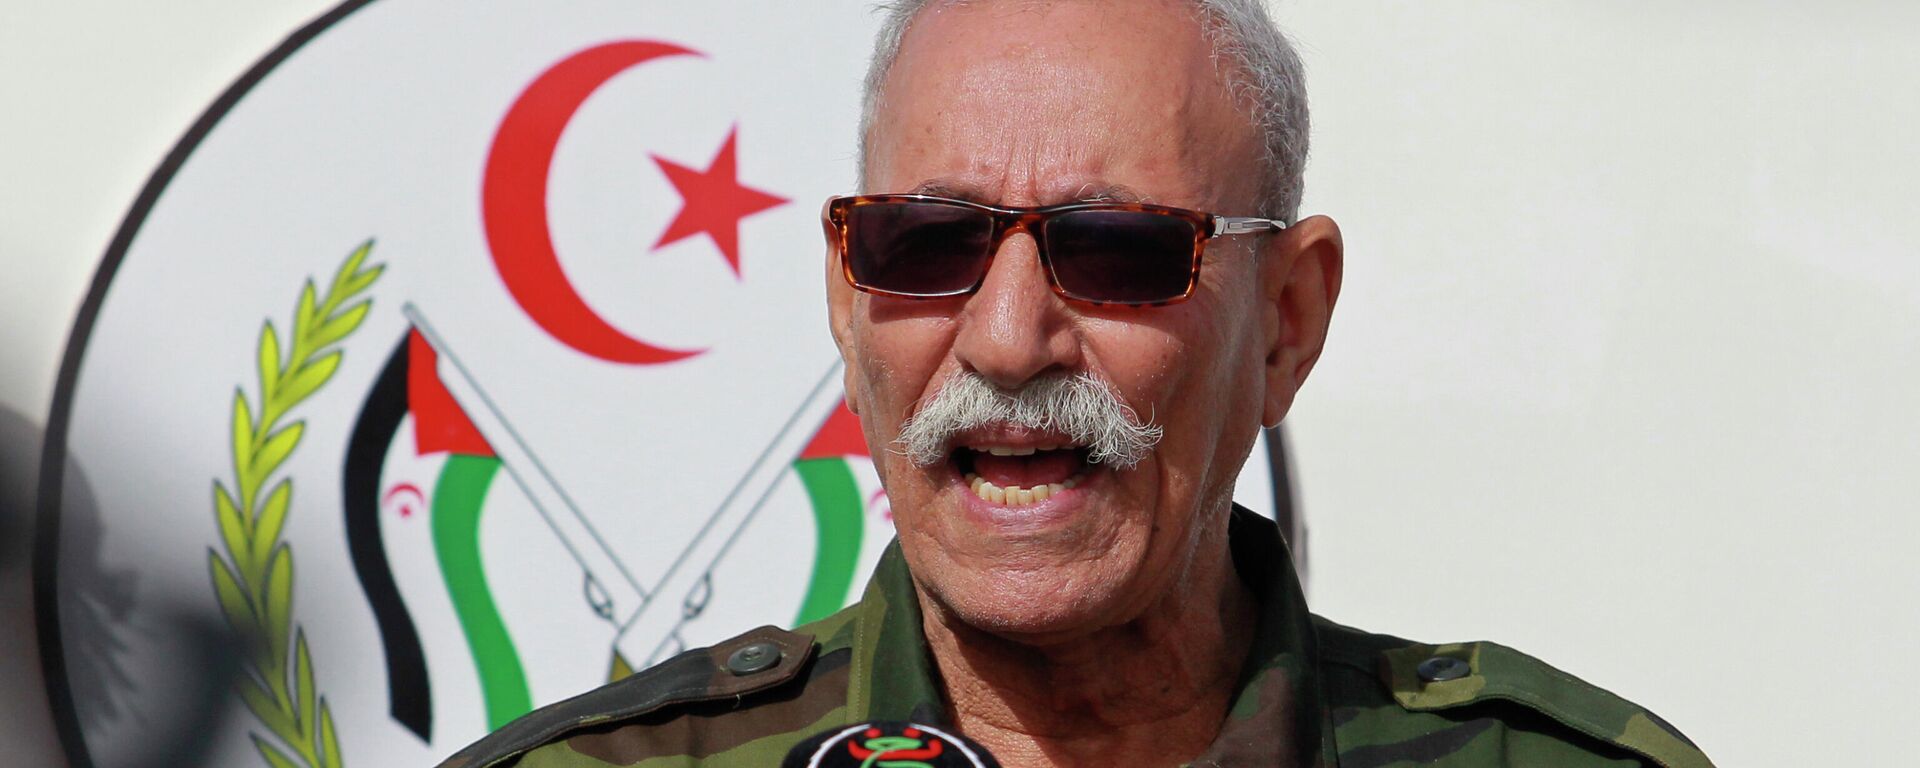 In this Feb. 27, 2021 file photo, Brahim Ghali, leader of the Polisario front, delivers a speech in a refugee camp near Tindouf, southern Algeria. Brahim Ghali, the leader of the Western Sahara independence movement at the heart of a diplomatic spat between Spain and Morocco, will appear before an investigating judge in Spain on June 1, 2021. Ghali, who has been recovering from COVID-19 in a Spanish hospital, faces a probe for possible genocide and a lawsuit for alleged tortures. - Sputnik International, 1920, 19.03.2022